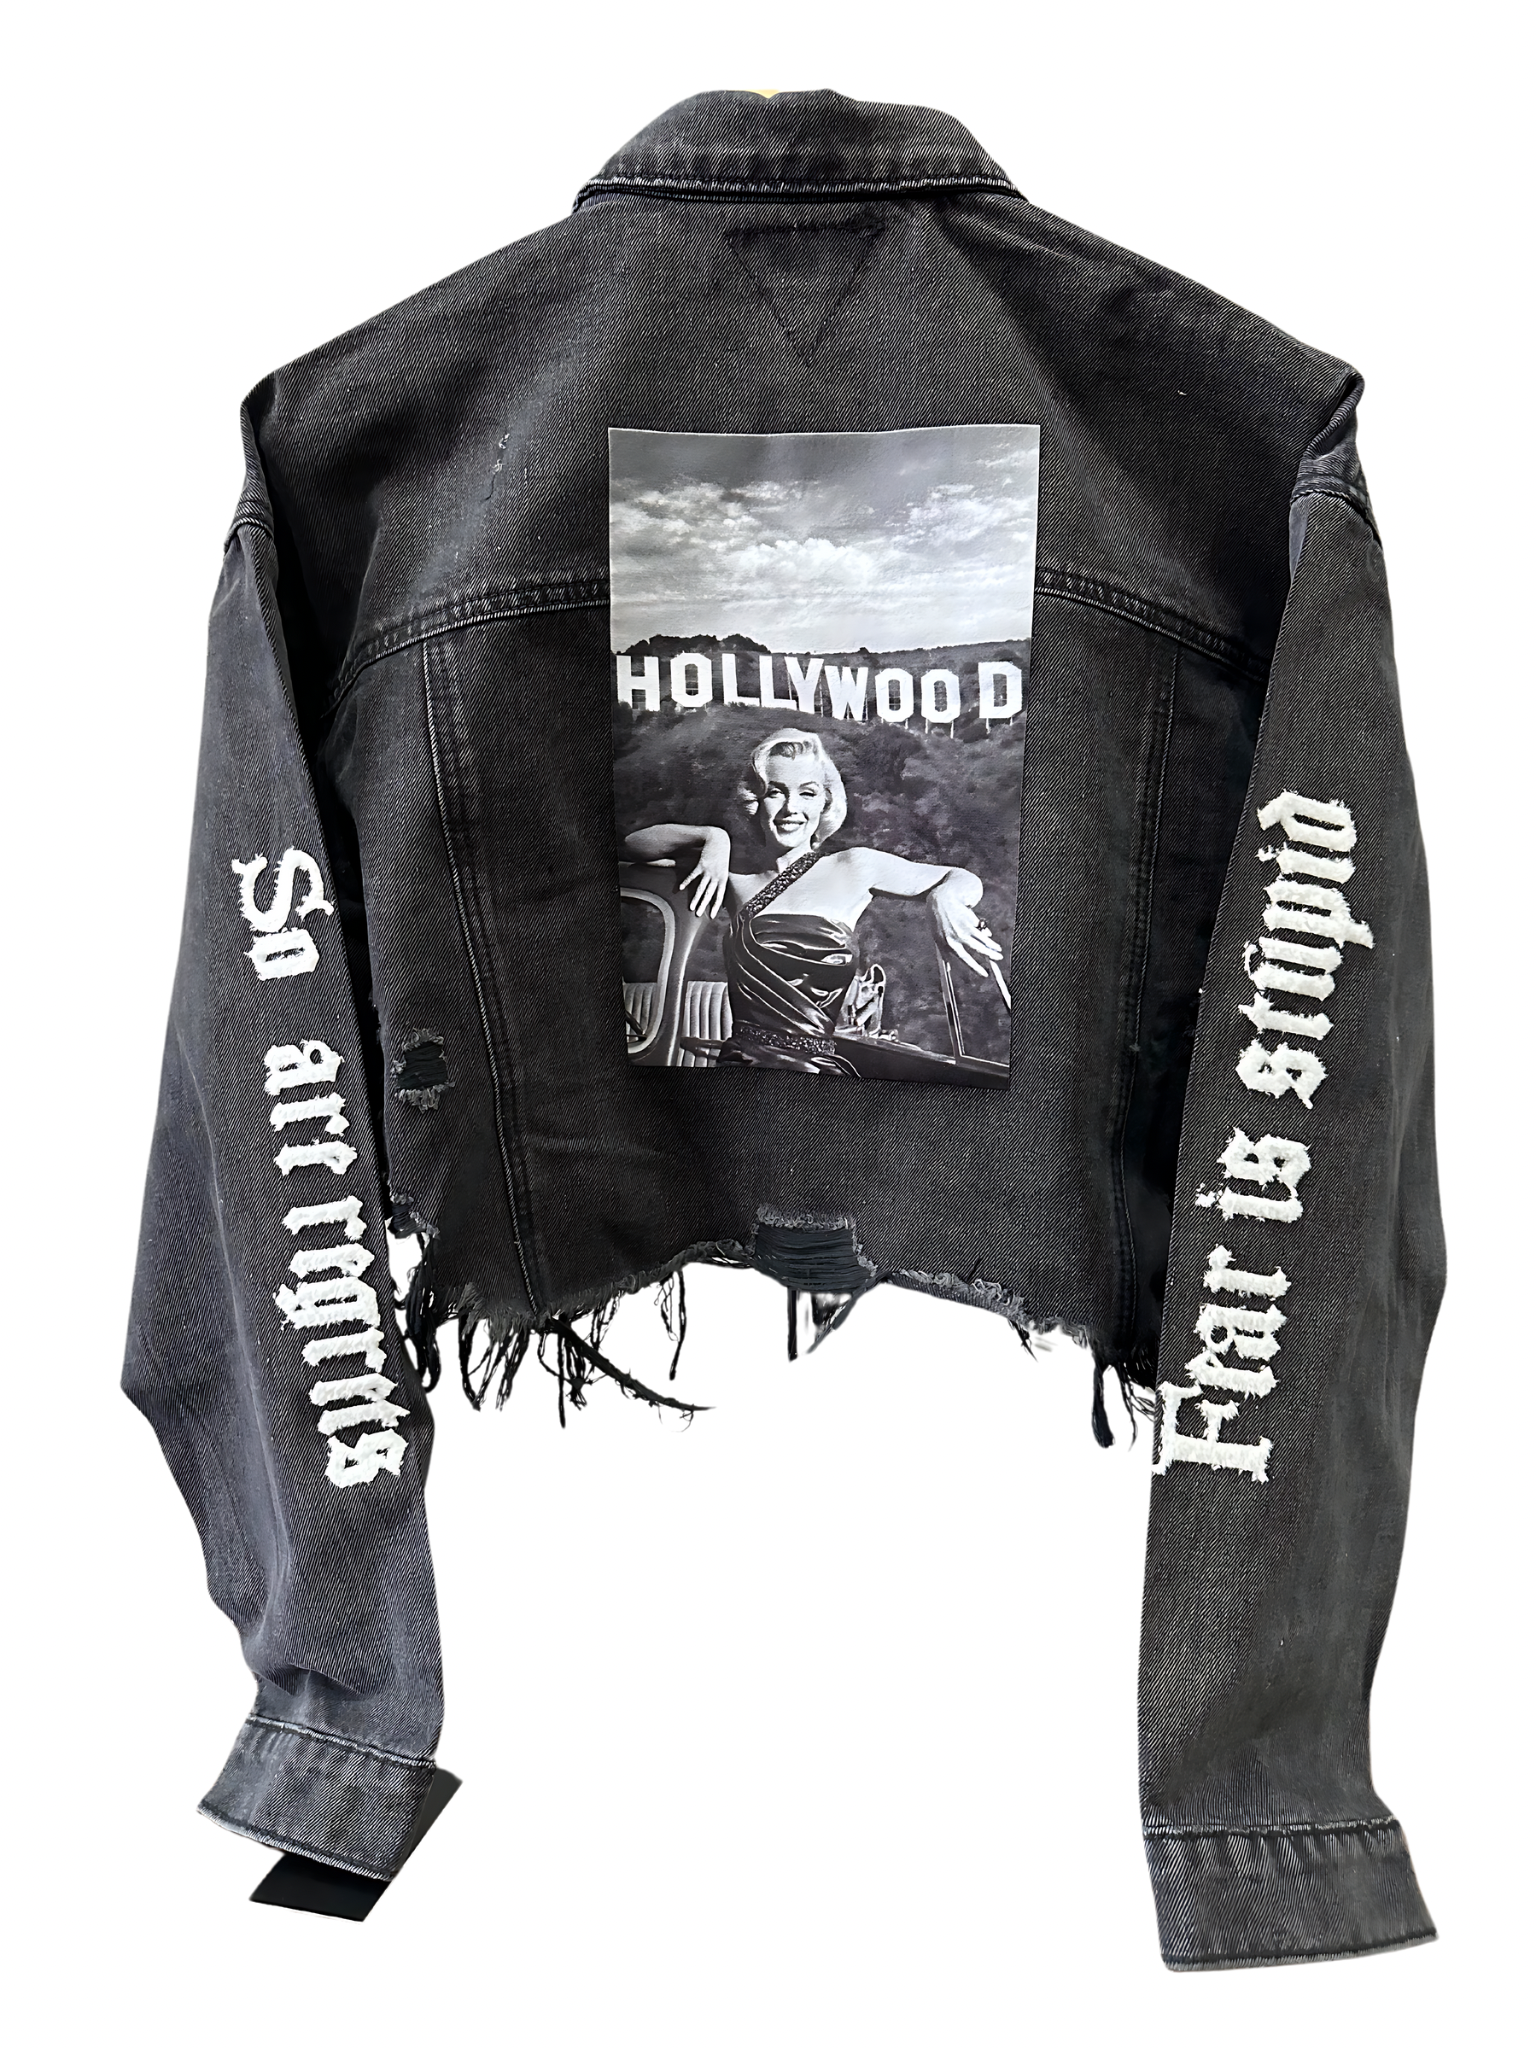 Black Cropped Denim Distressed Jacket.  Iconic Marily Monroe Hollywood Image.  Sleeve Detail Fear is Stupid So Are Regrets